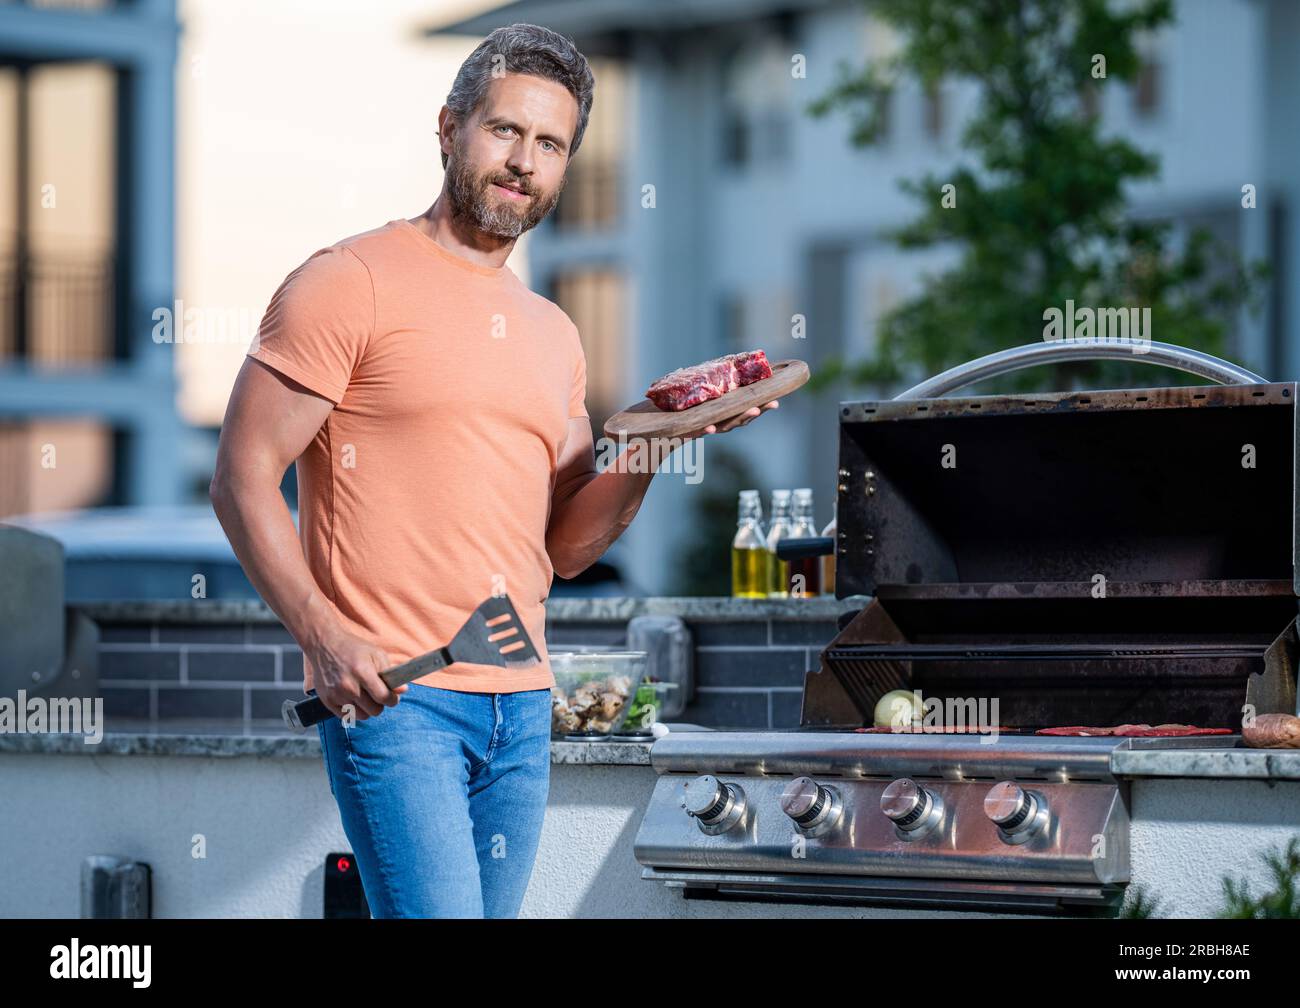 barbecue man grilling meat sirloin steak at outdoor backyard grill bbq. Stock Photo